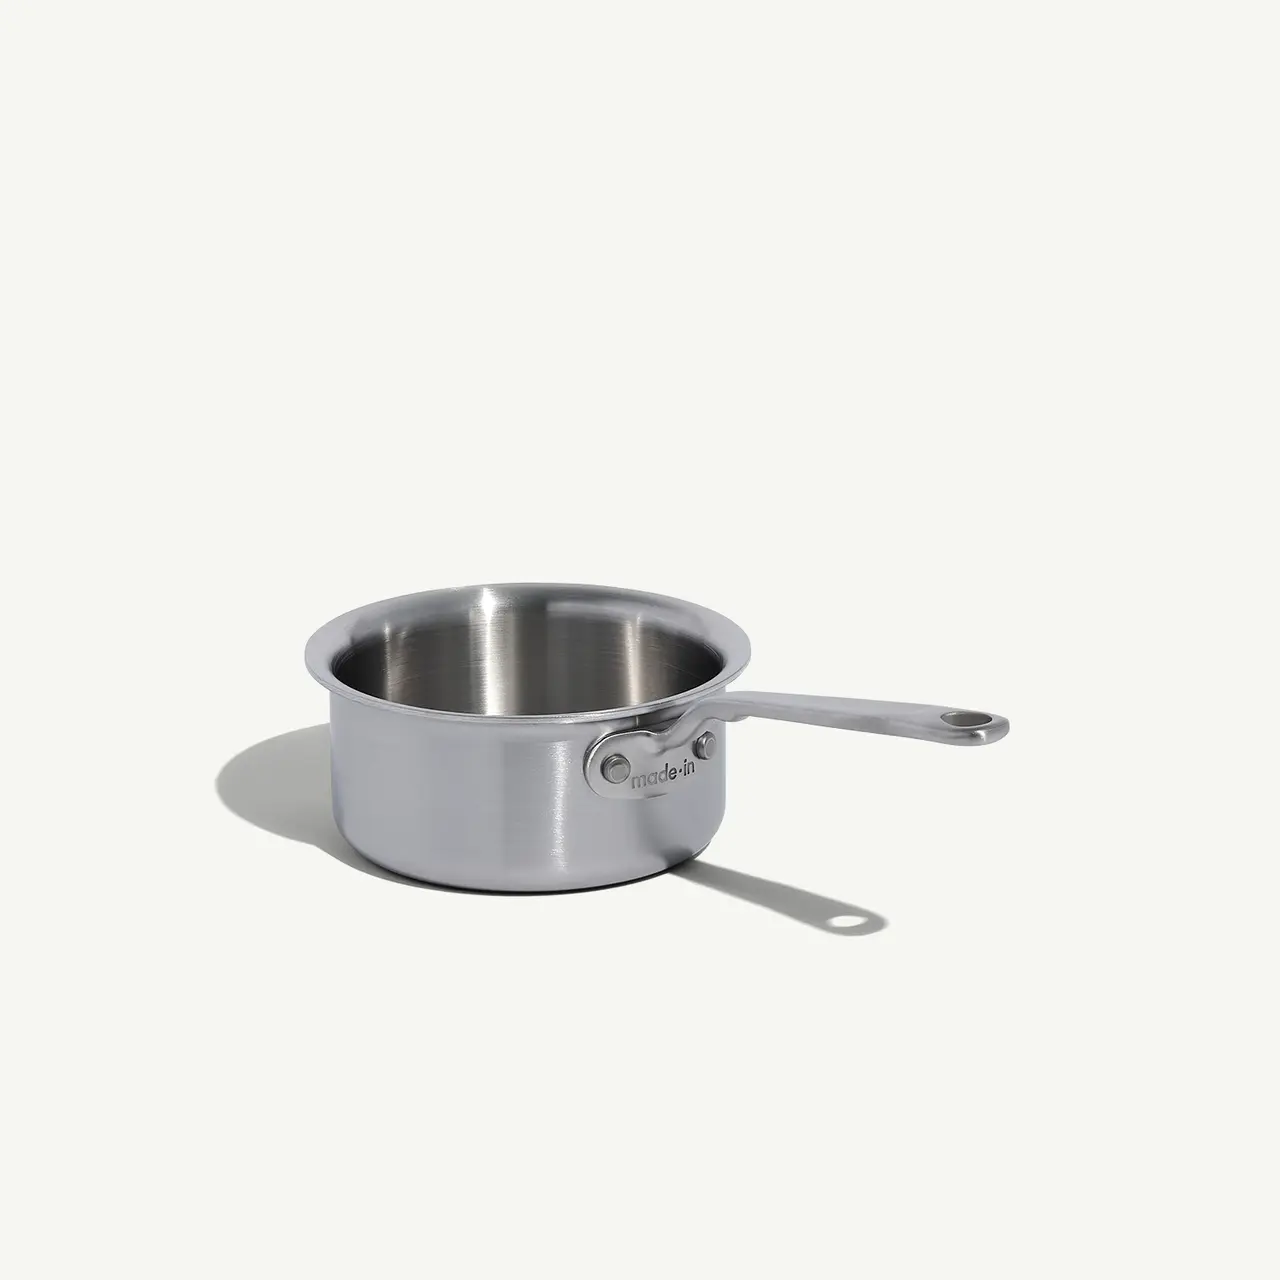 A stainless steel saucepan with a long handle sits on a plain, light-colored background.